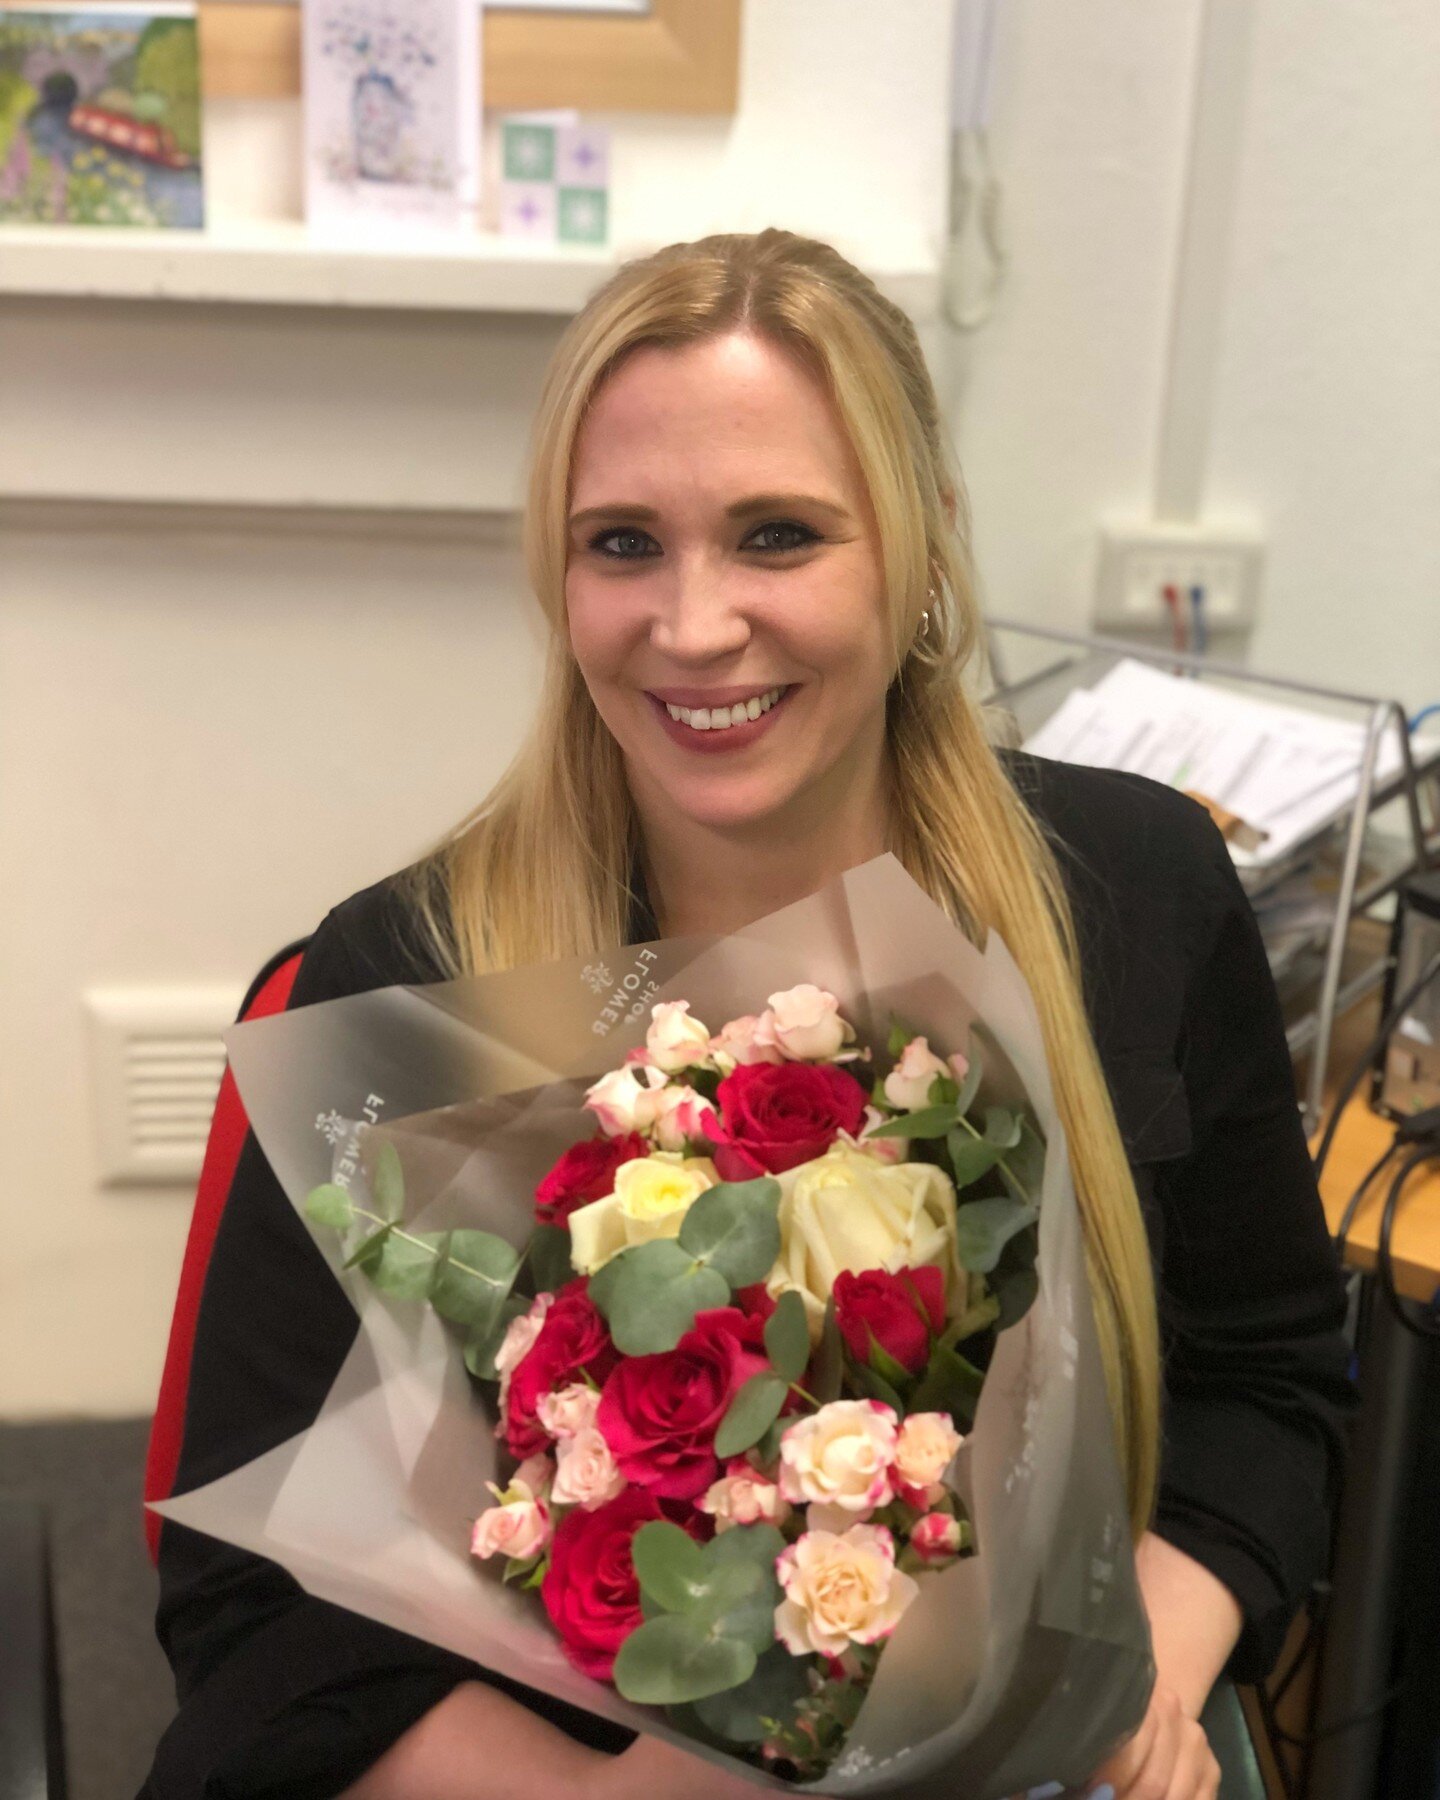 ⭐ Happy Birthday to our wonderful Jo B!⭐

We are wishing you a very happy birthday filled with flowers, cake, and of course, a cheeky Nando's lunch! 🎂

We hope you have the best day and a very happy and successful year to come! 🎉 

#birthday #offic